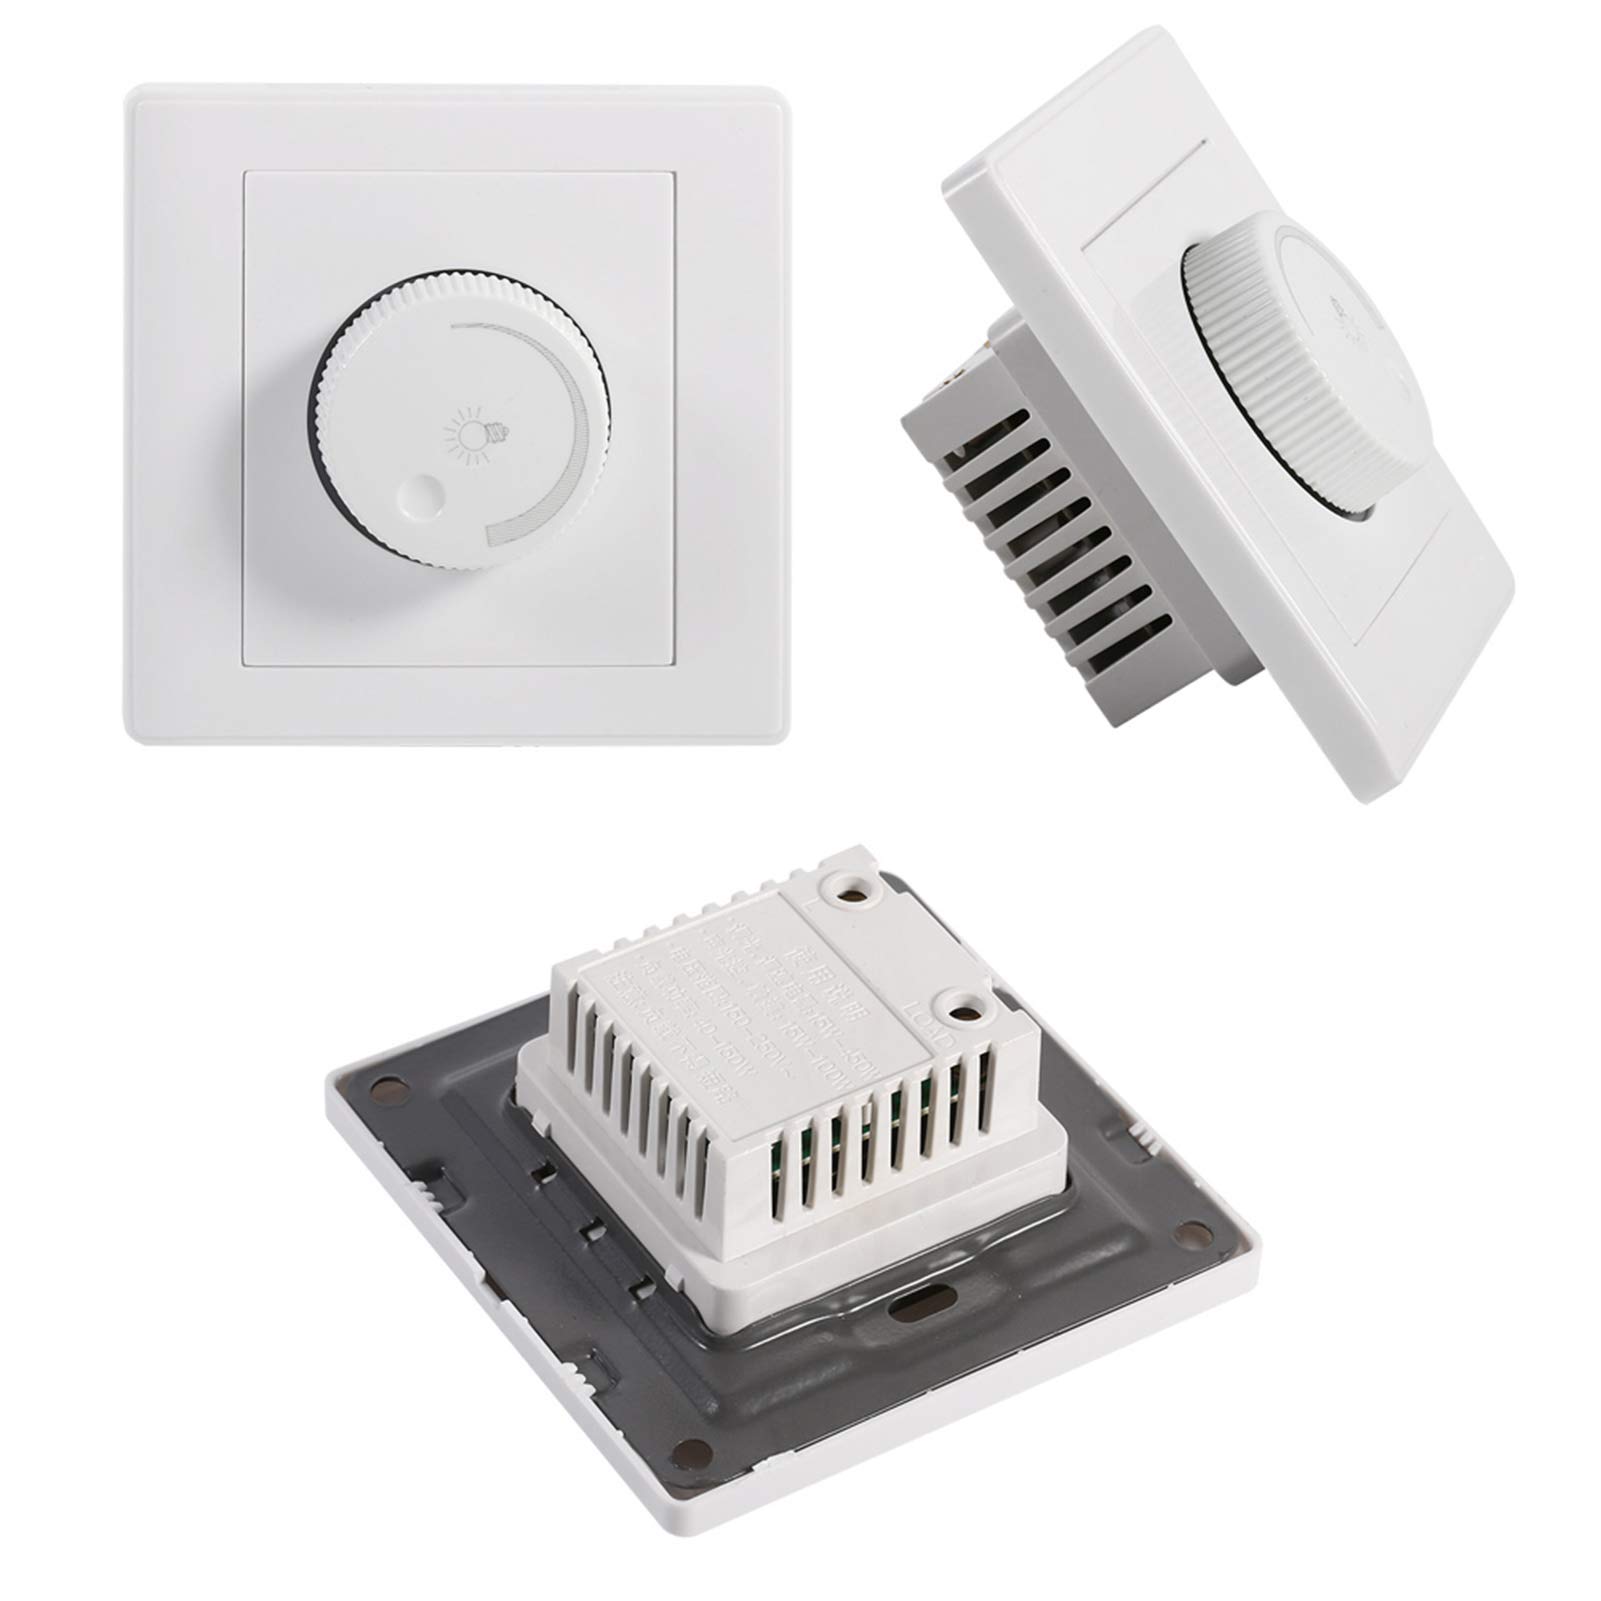 1Pcs Practical Home Wall, Led Dimmer Switch Mounted Knob Lamp Brightness Controller Panel Dimmer Switch New